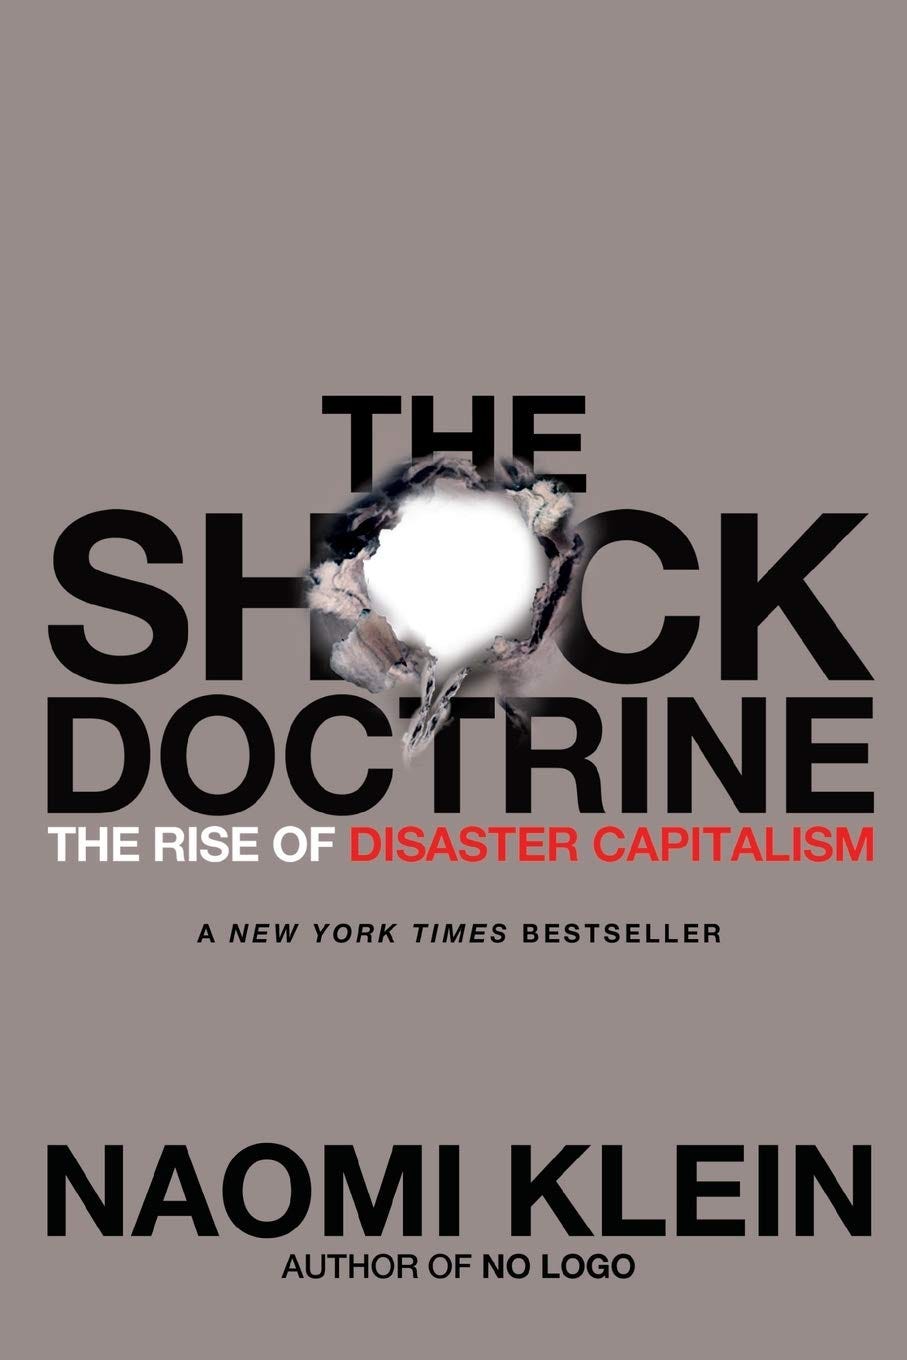 Naomi Klein, The Shock Doctrine the rise of disaster capitalism